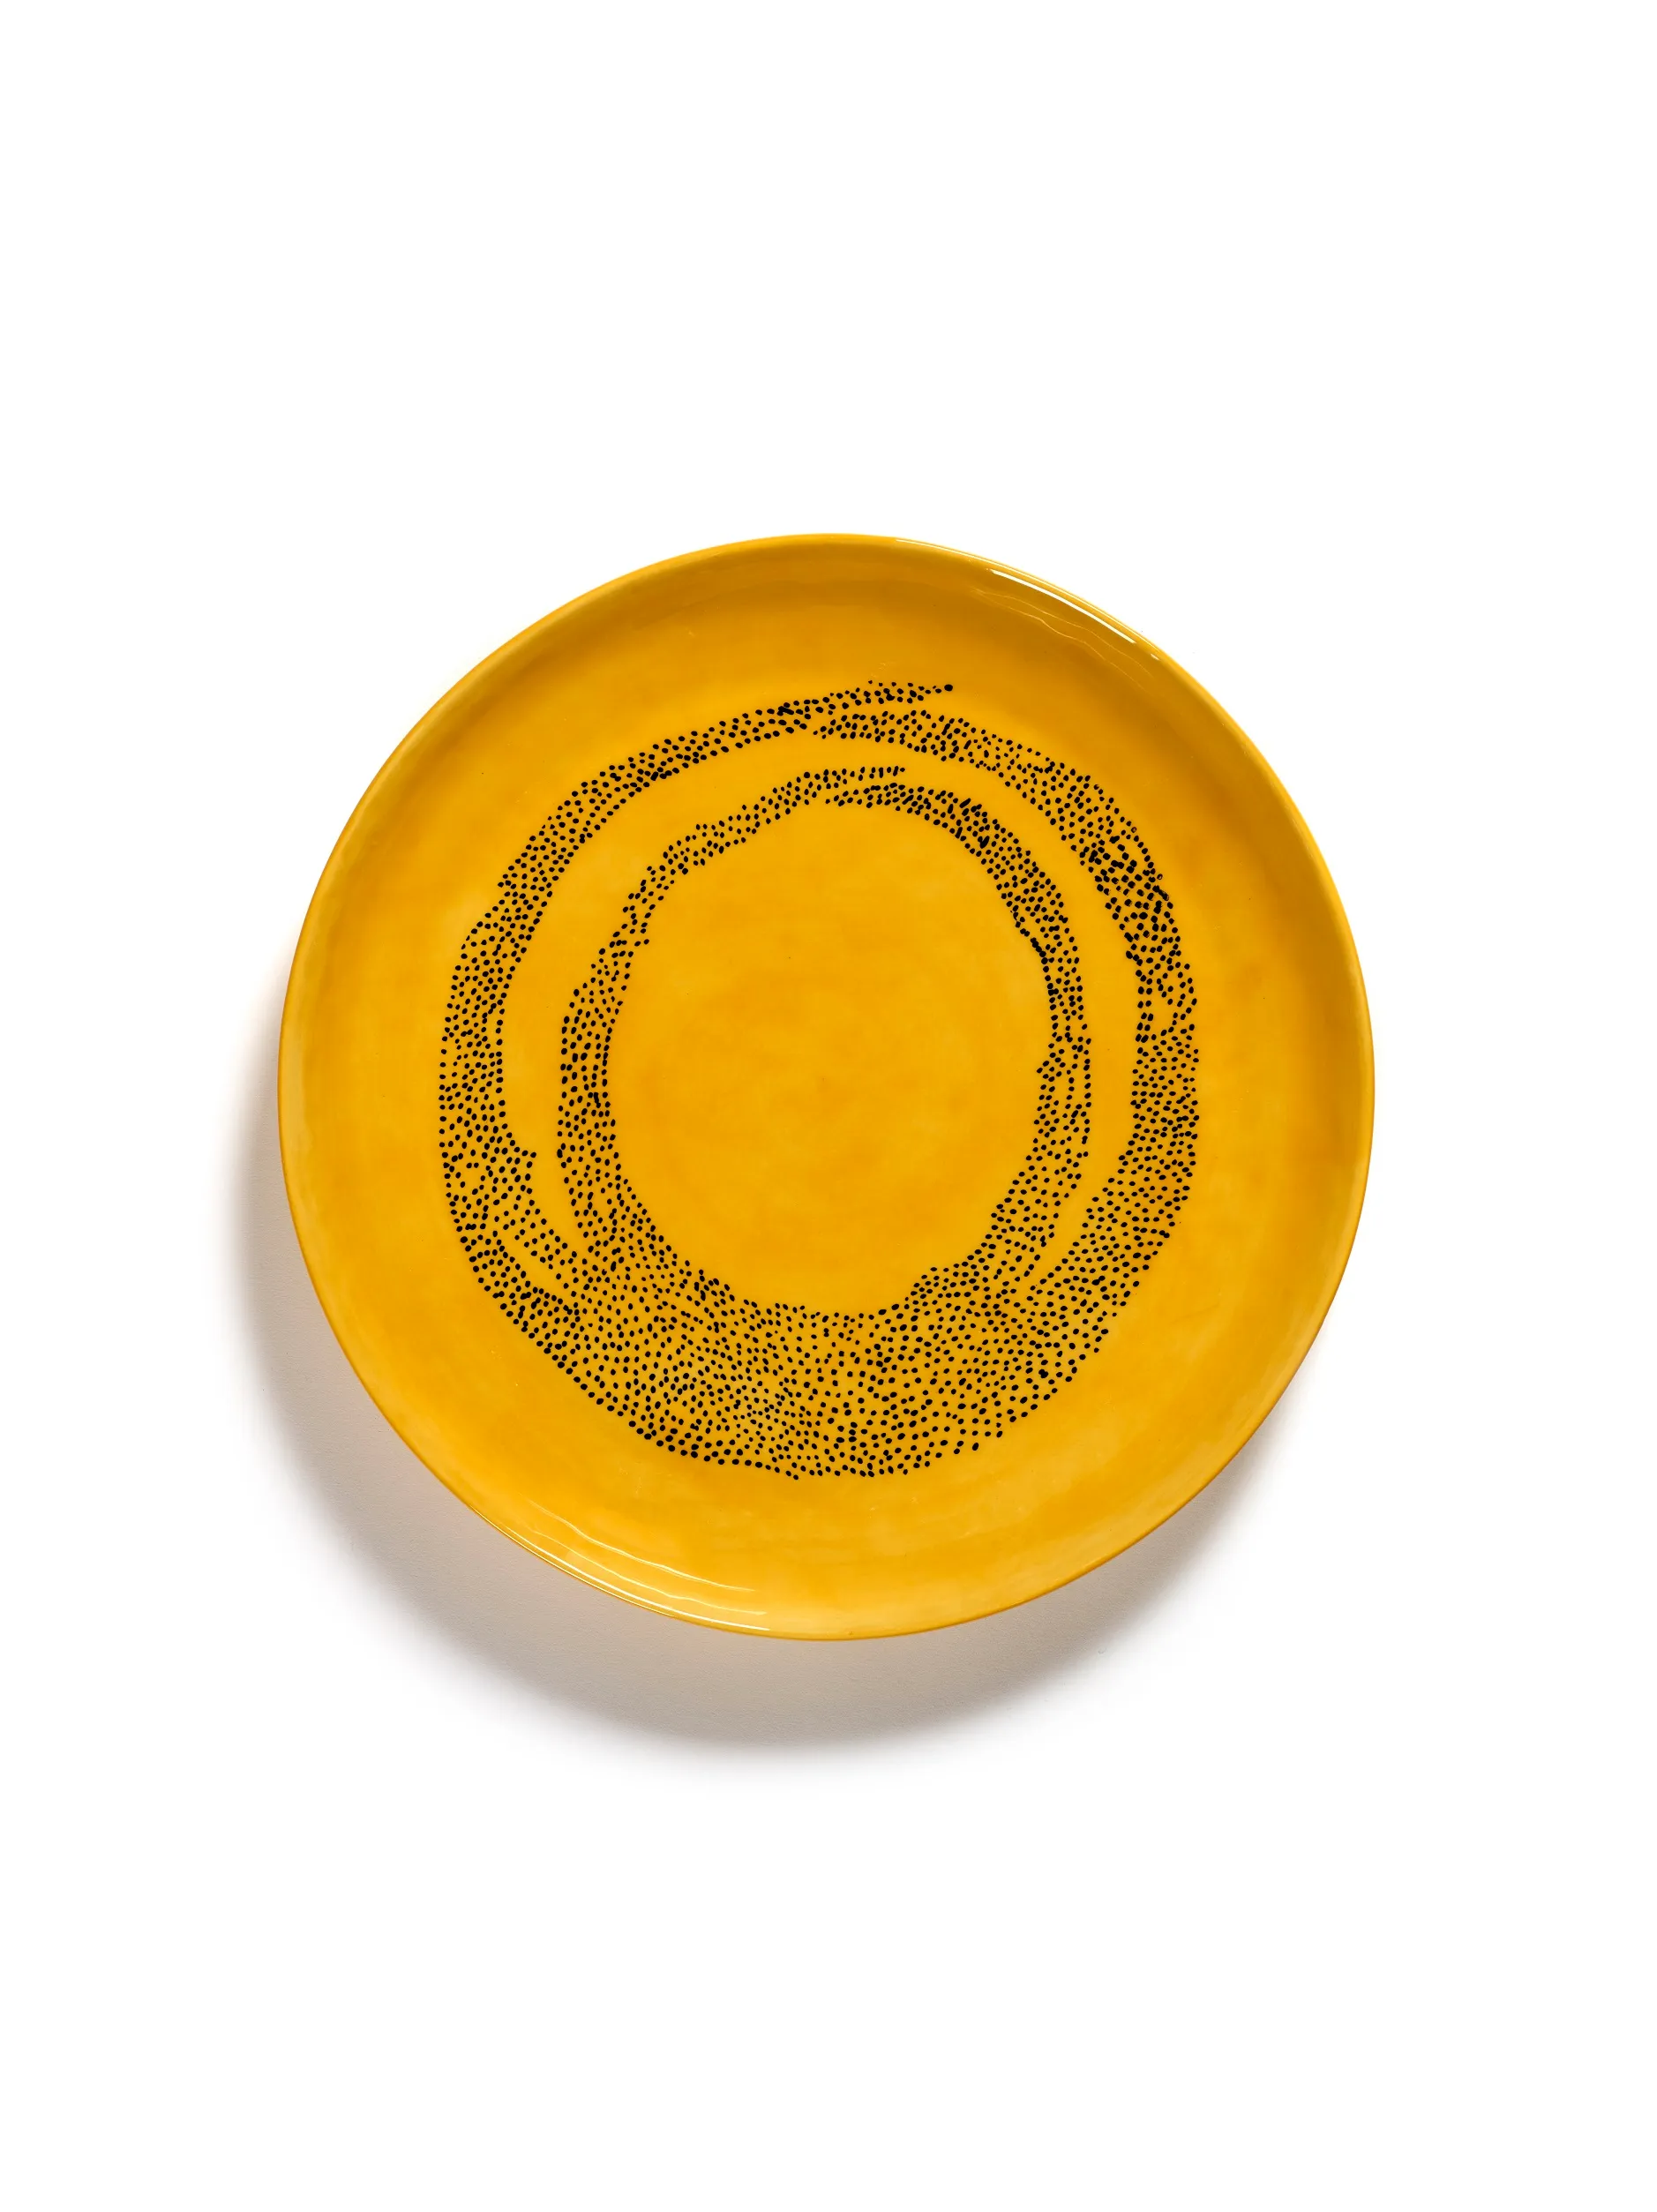 Serving Plate S Yellow-Dots Black Feast Ottolenghi by Serax L 35 W 35 H 4 CM